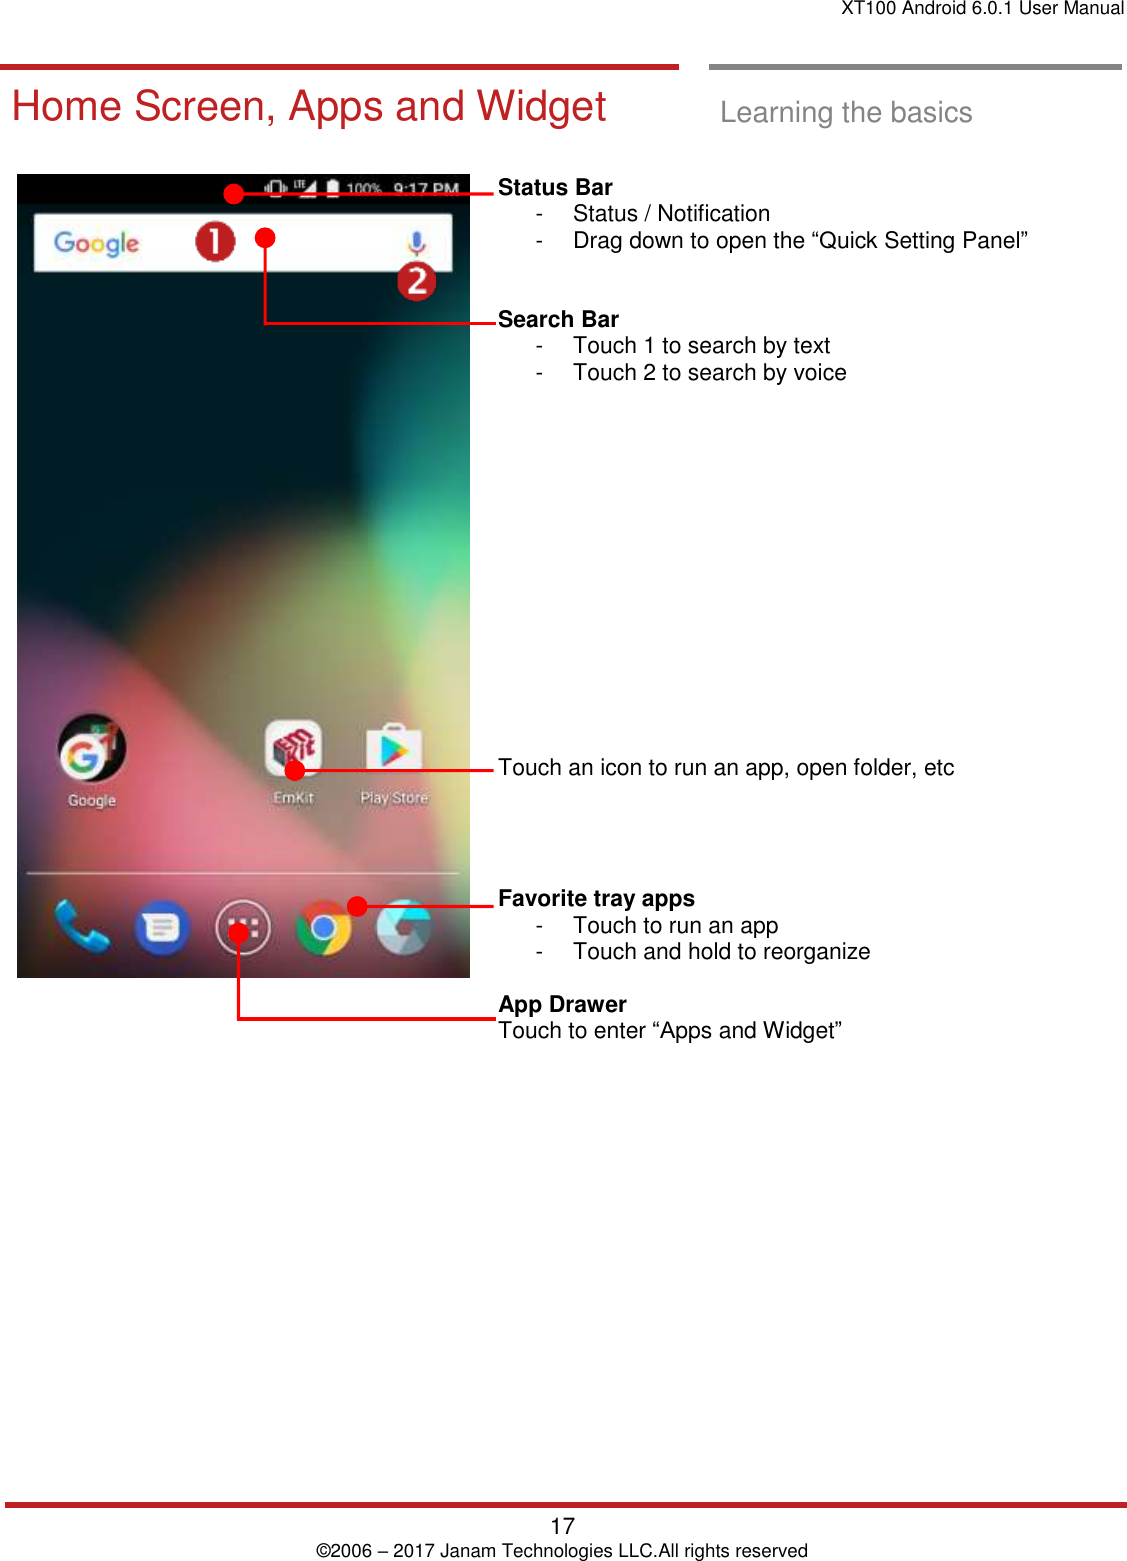 XT100 Android 6.0.1 User Manual   17 © 2006 – 2017 Janam Technologies LLC.All rights reserved  Learning the basics  Home Screen, A pps and Widget  Home Screen, Apps and Widget  Learning the basics     Status Bar  -  Status / Notification  -  Drag down to open the “Quick Setting Panel”    Search Bar -  Touch 1 to search by text  -  Touch 2 to search by voice               Touch an icon to run an app, open folder, etc     Favorite tray apps  -  Touch to run an app -  Touch and hold to reorganize  App Drawer  Touch to enter “Apps and Widget”      